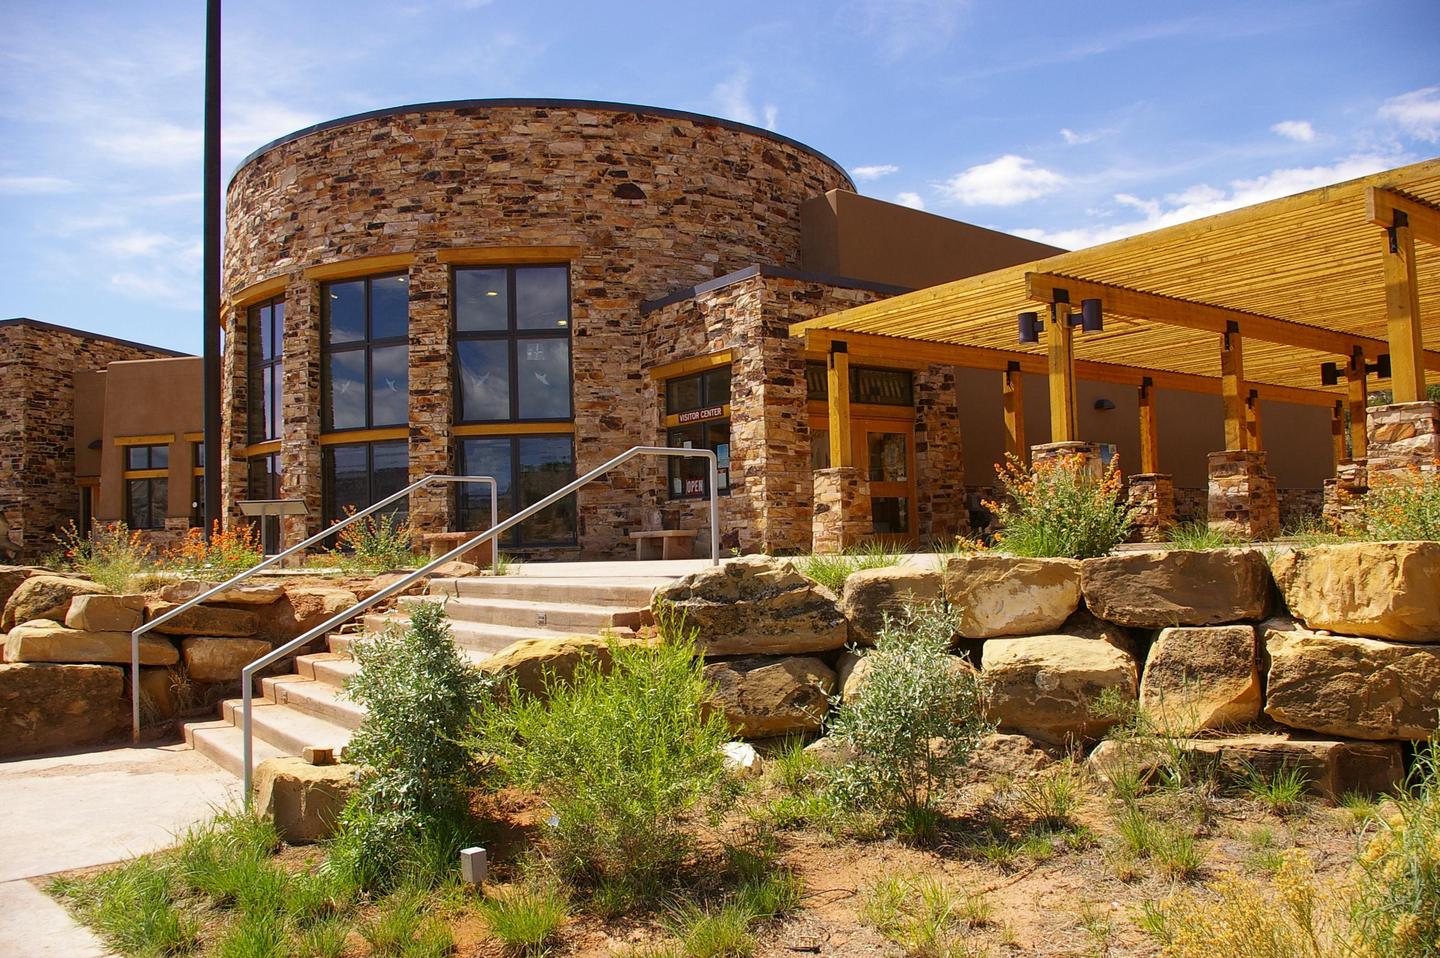 Escalante Interagency Visitor Center ExteriorThe Escalante Interagency Visitor Center is a one-stop shop for information about Glen Canyon National Recreation Area, Dixie National Forest, and Grand Staircase-Escalante National Monument,